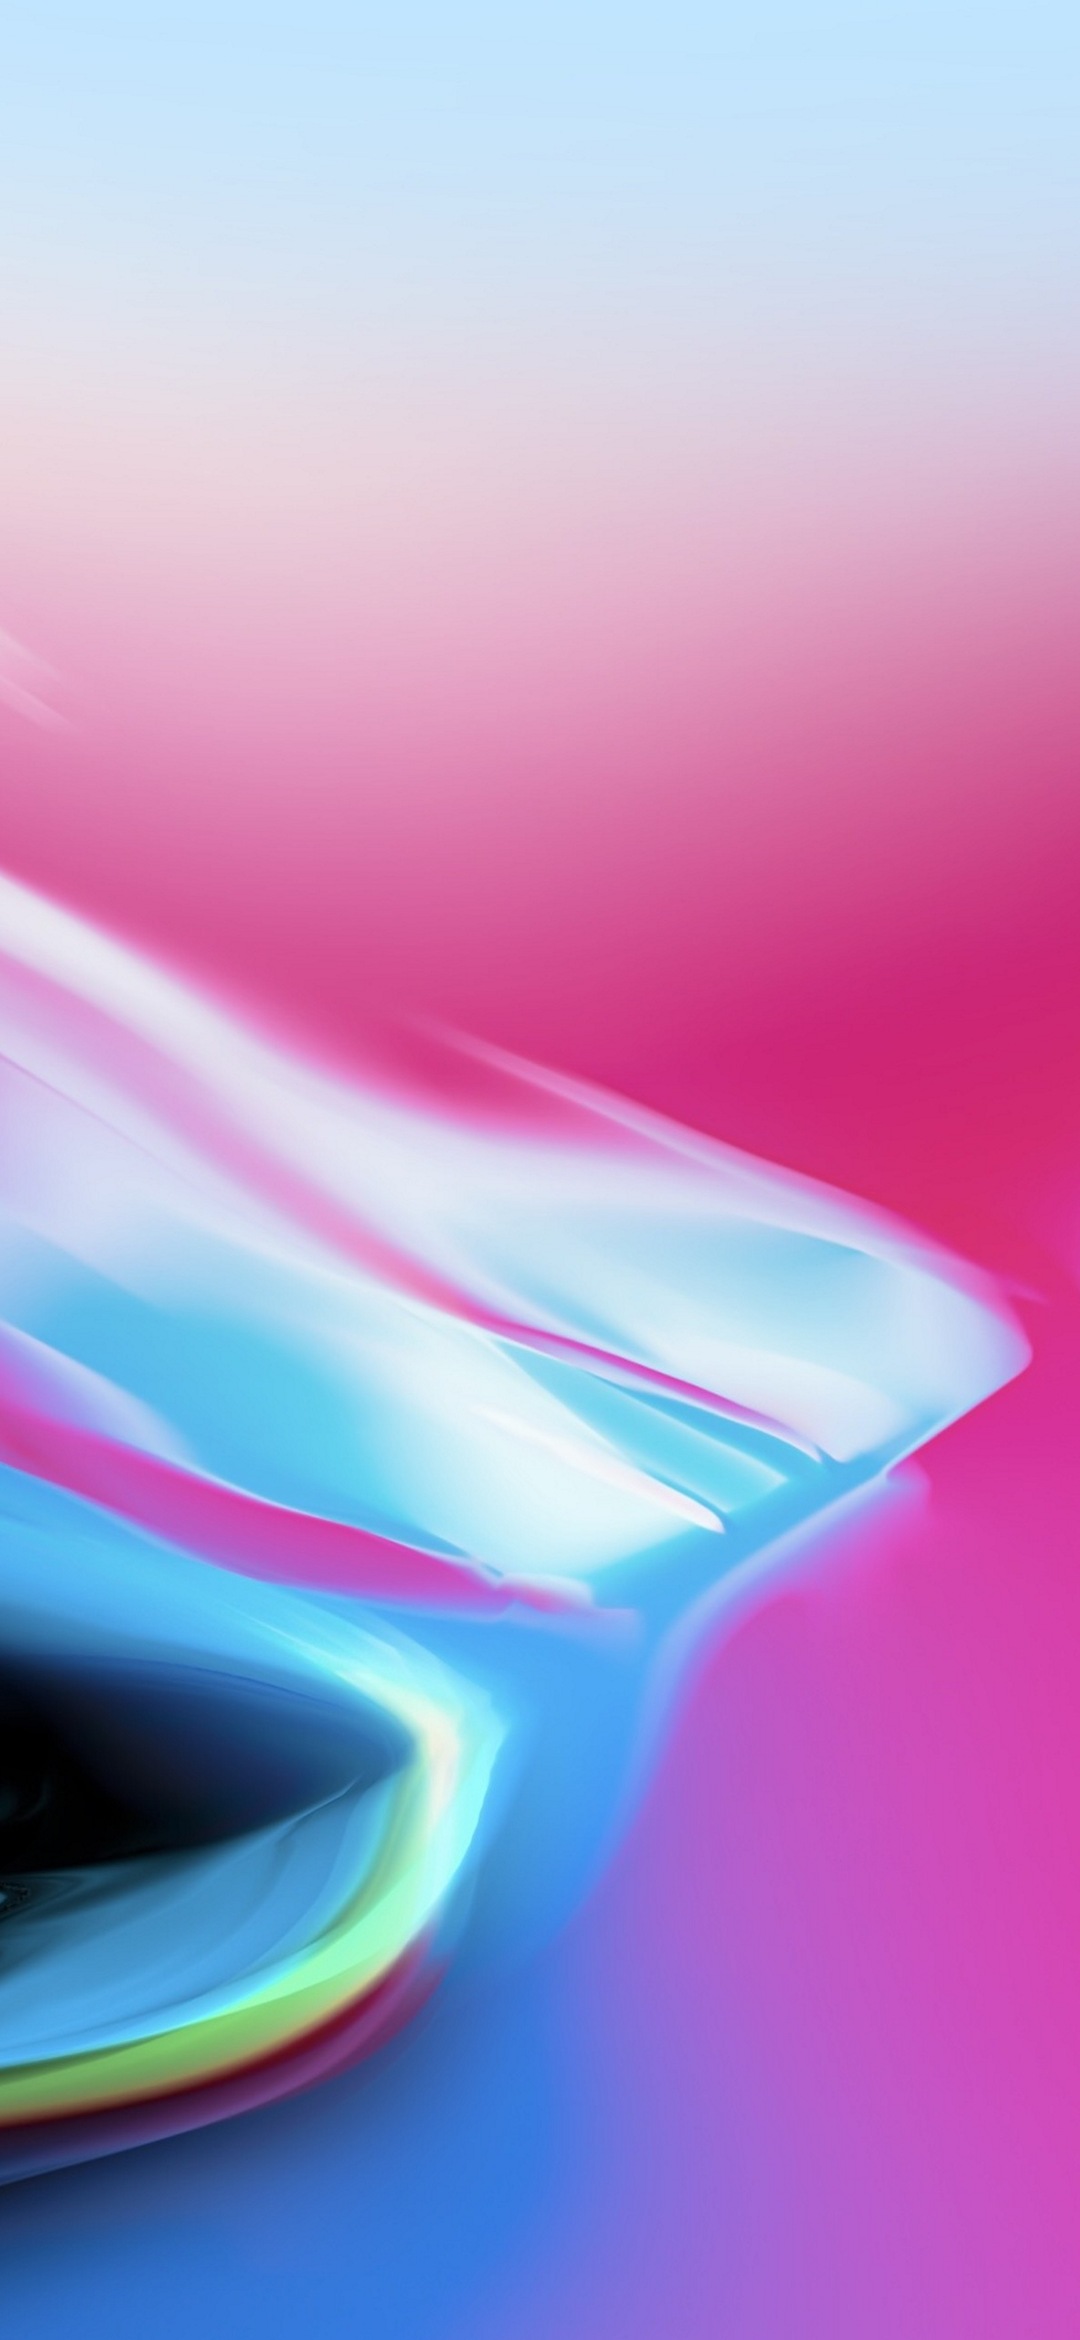 Blue and pink gradient liquid ZenFone 6 Android 壁紙・待ち受け